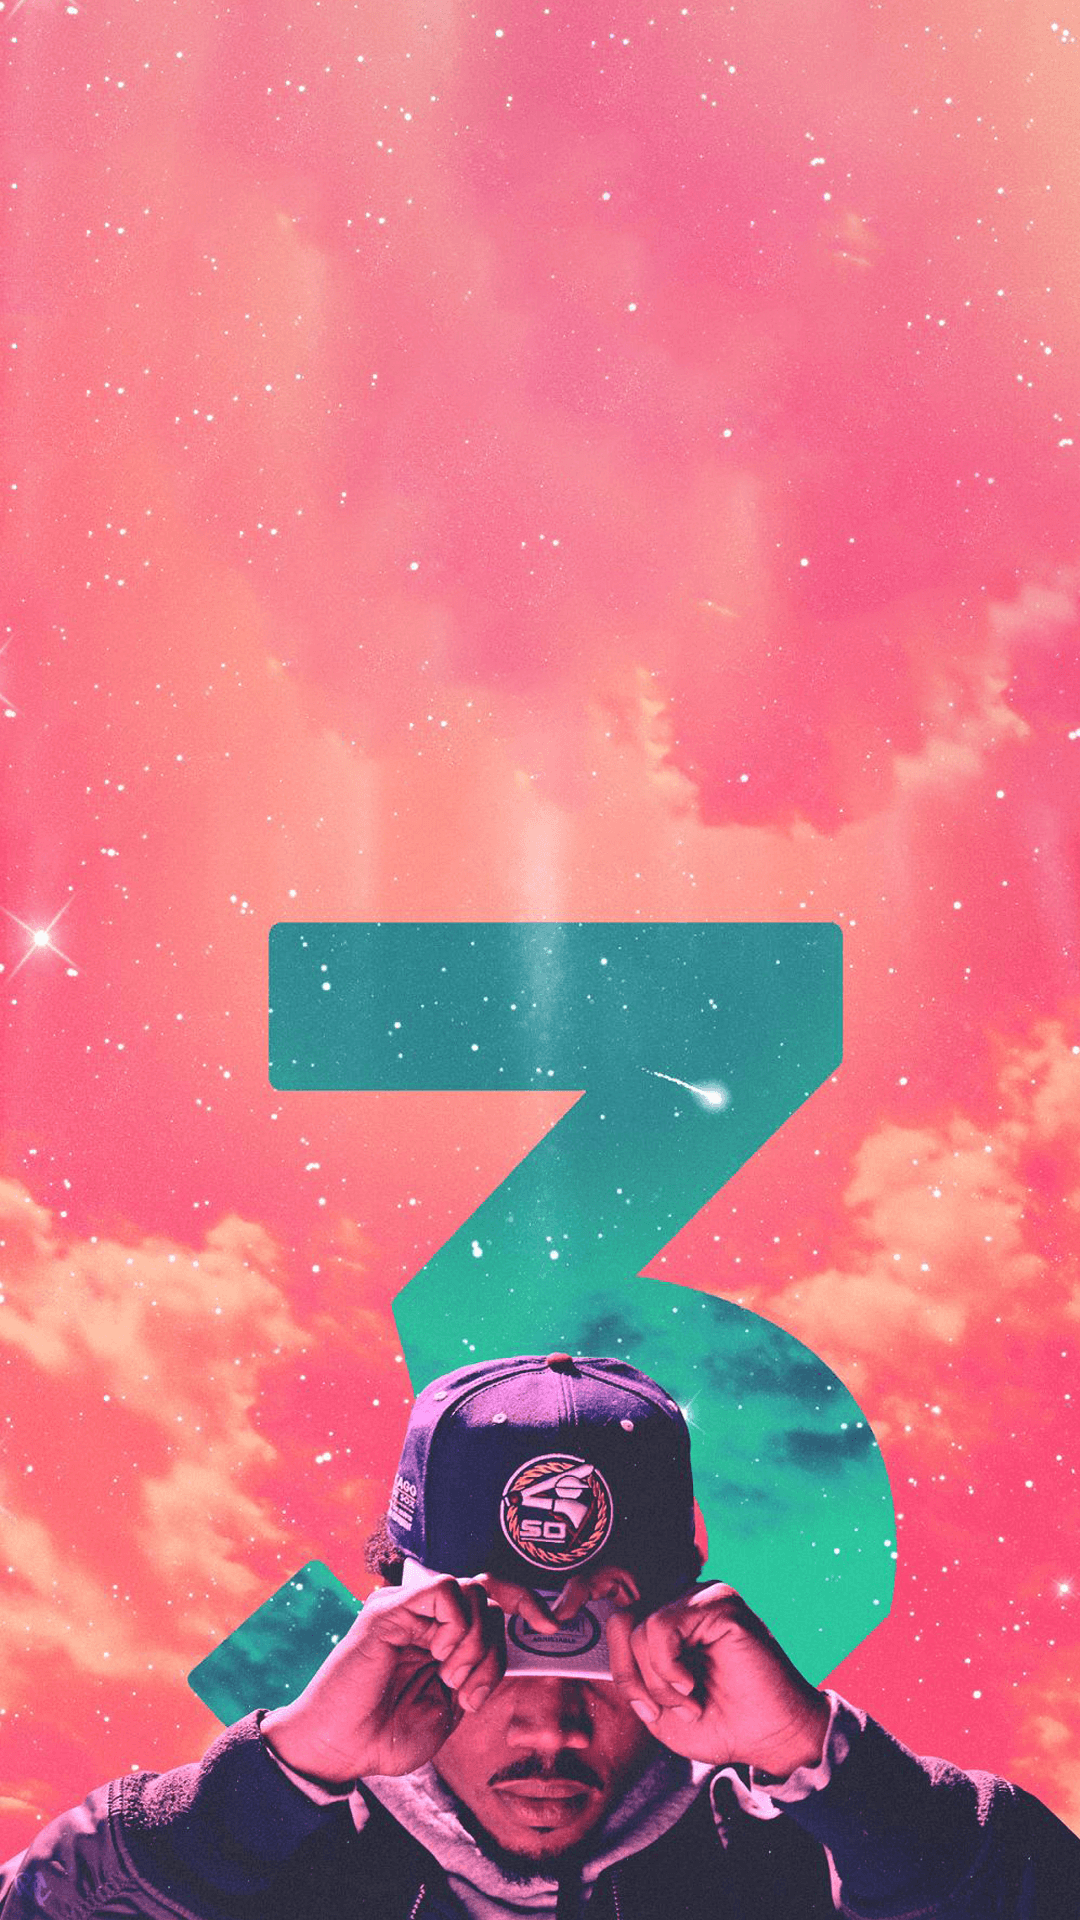 Chance the Rapper iPhone Wallpaper Free Chance